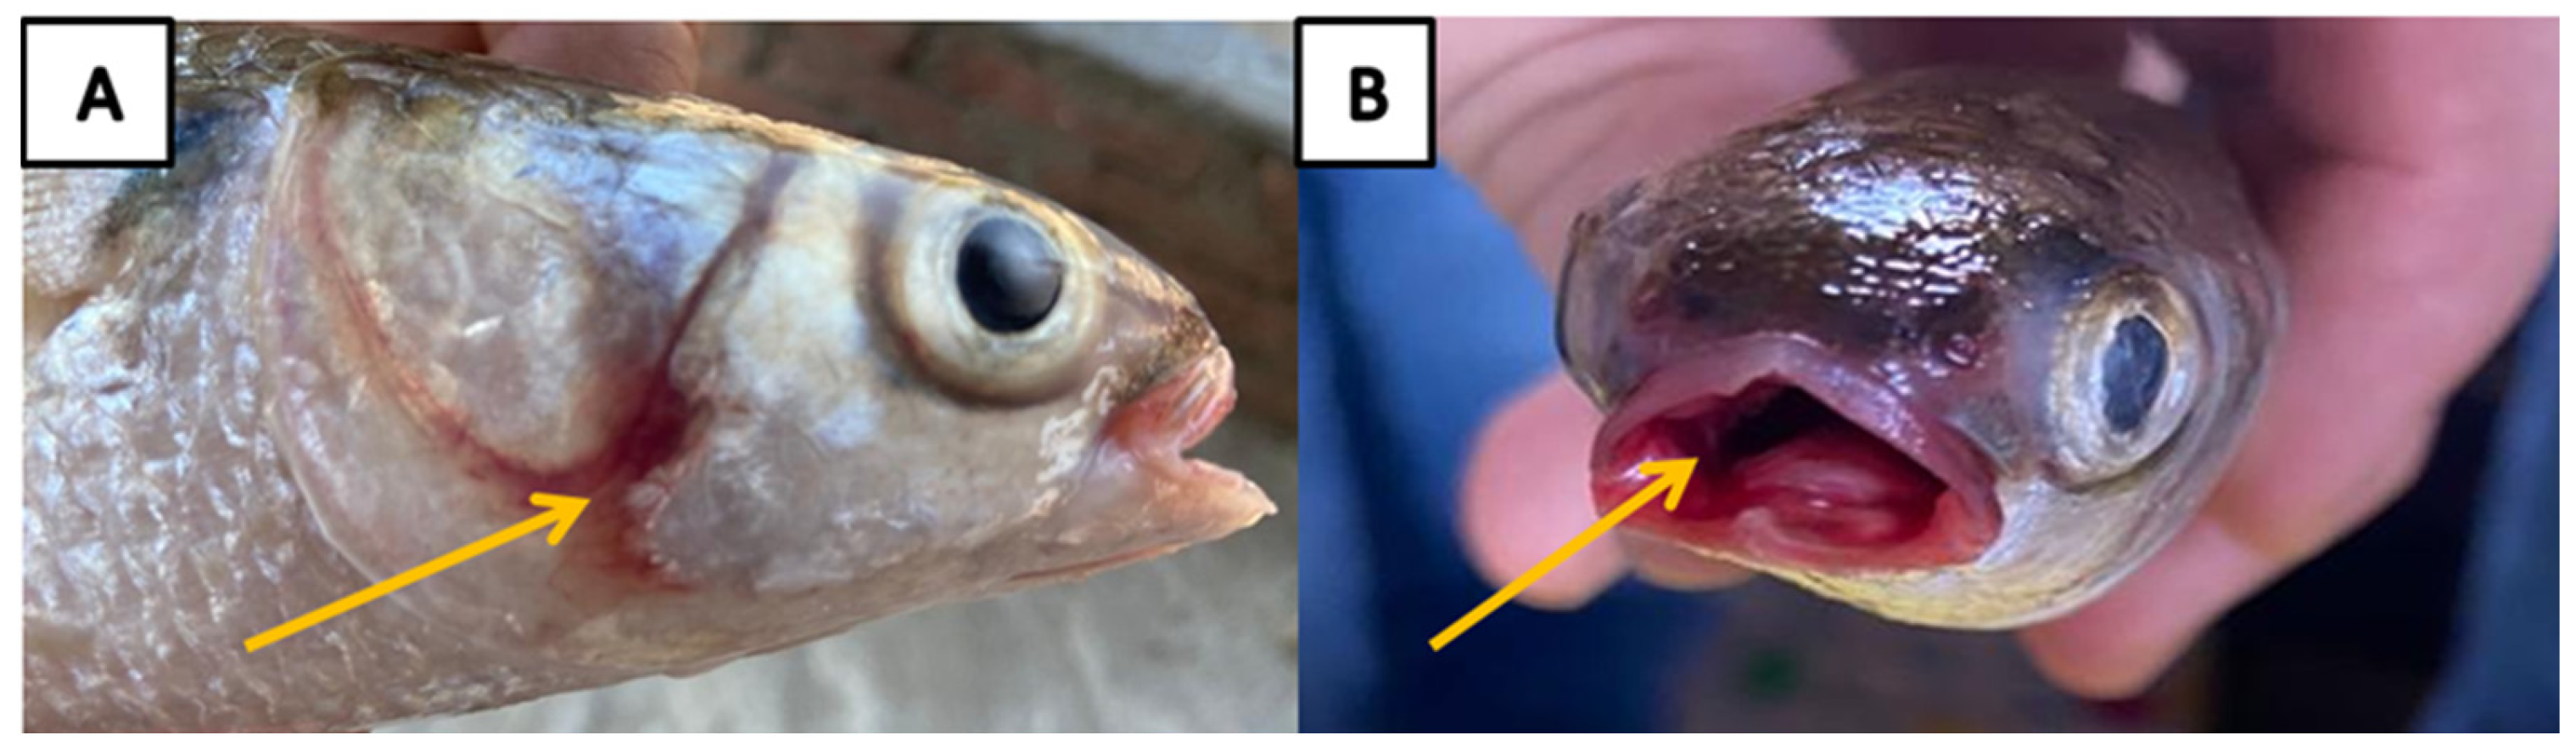 Frontiers  Exploring the application of Corynebacterium glutamicum single  cell protein in the diet of flathead grey mullet (Mugil cephalus): effects  on growth performance, digestive enzymes activity and gut microbiota